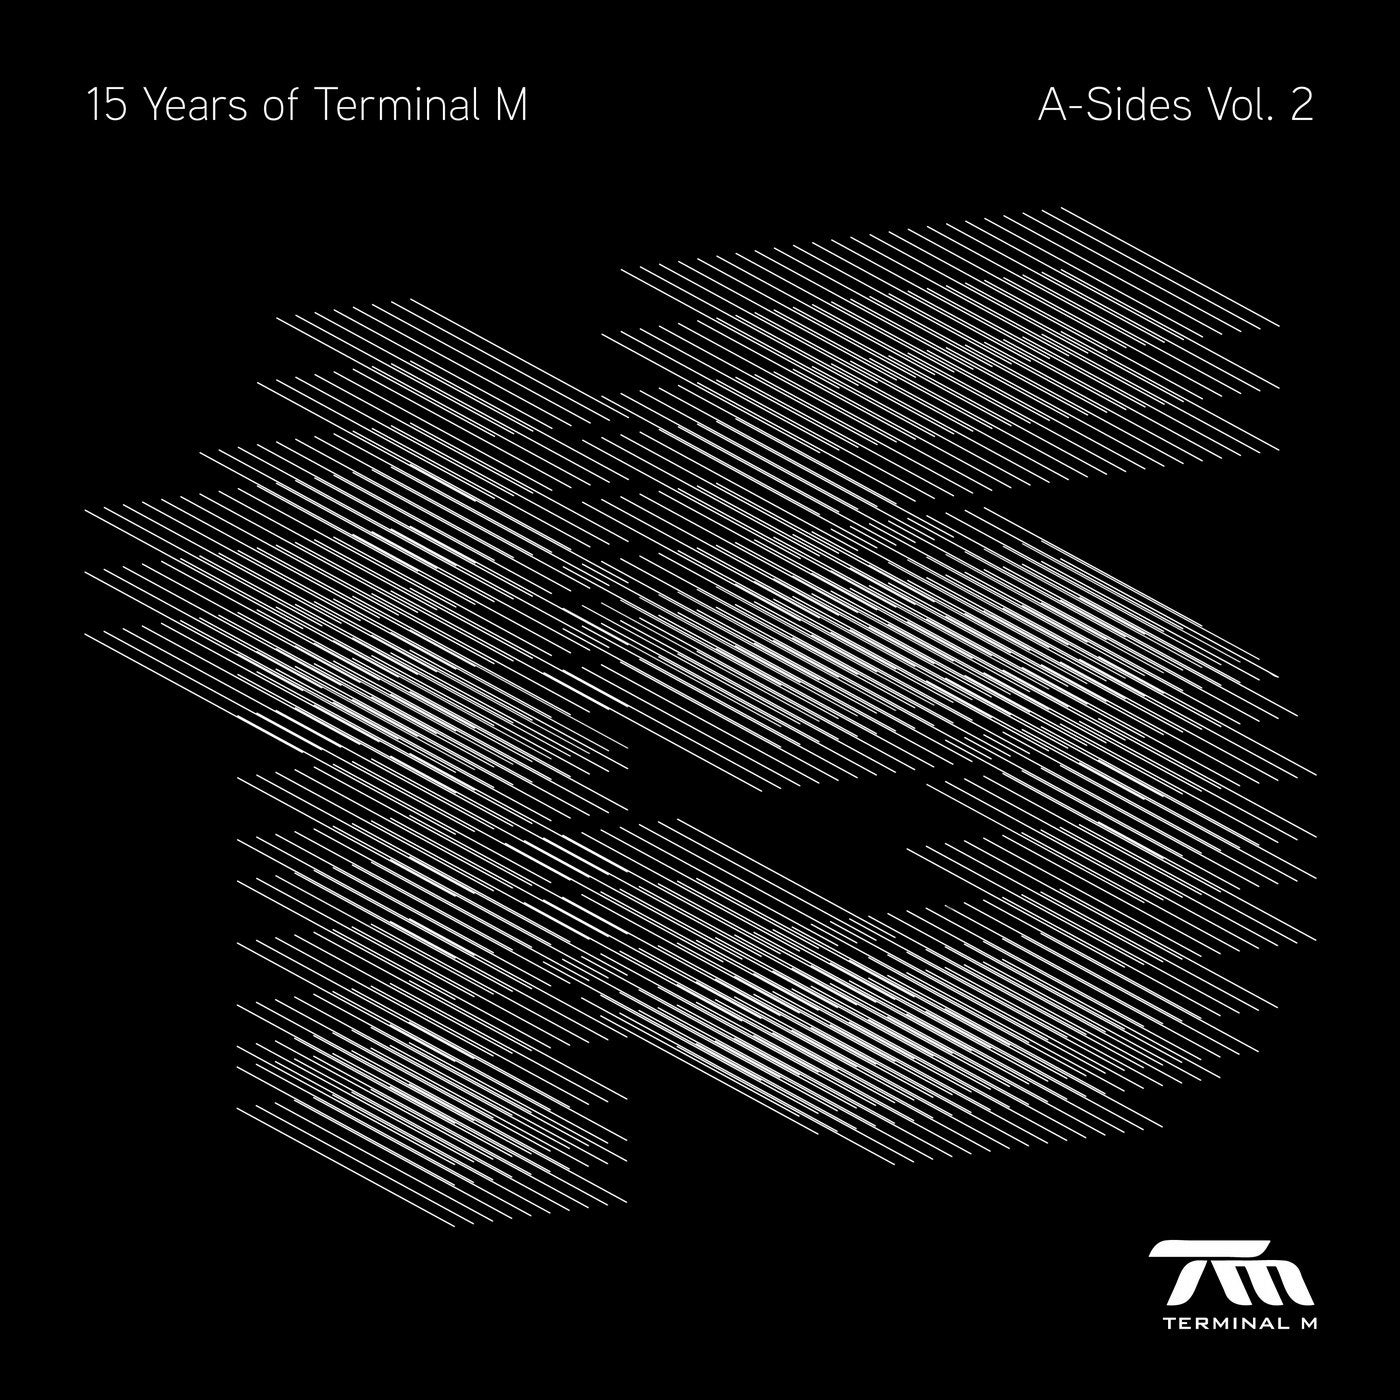 15 Years Of Terminal M - The A-Sides Vol. 2